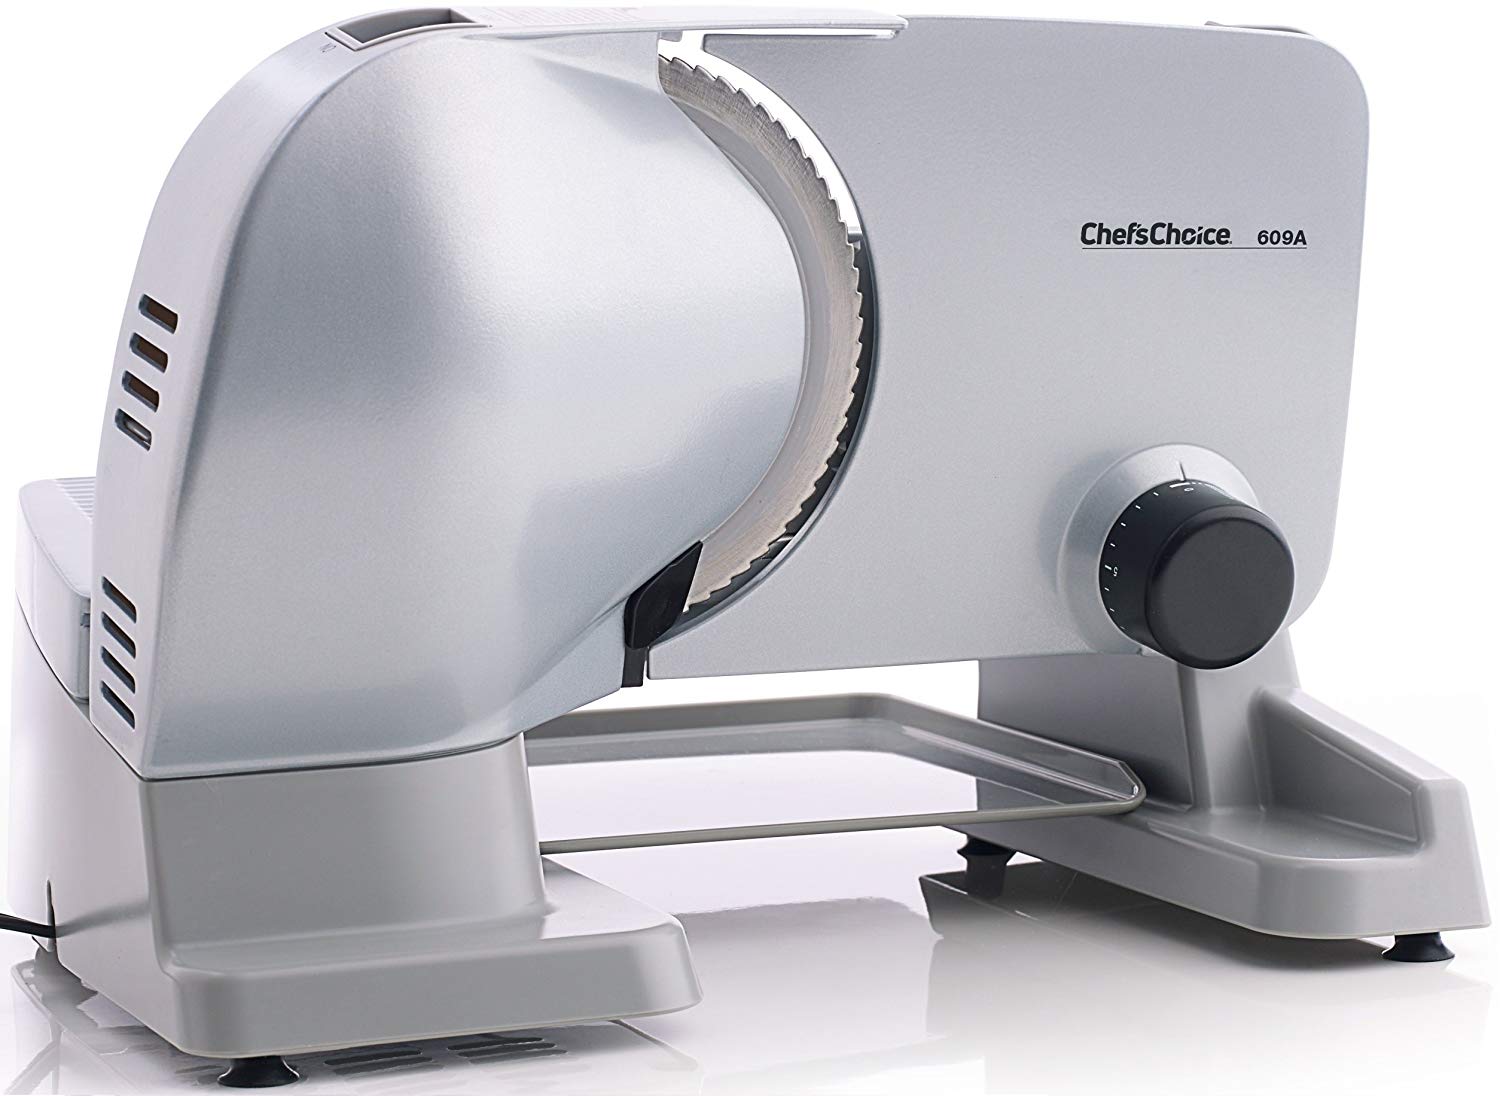 Chef'sChoice Electric Stainless Steel Meat Slicer